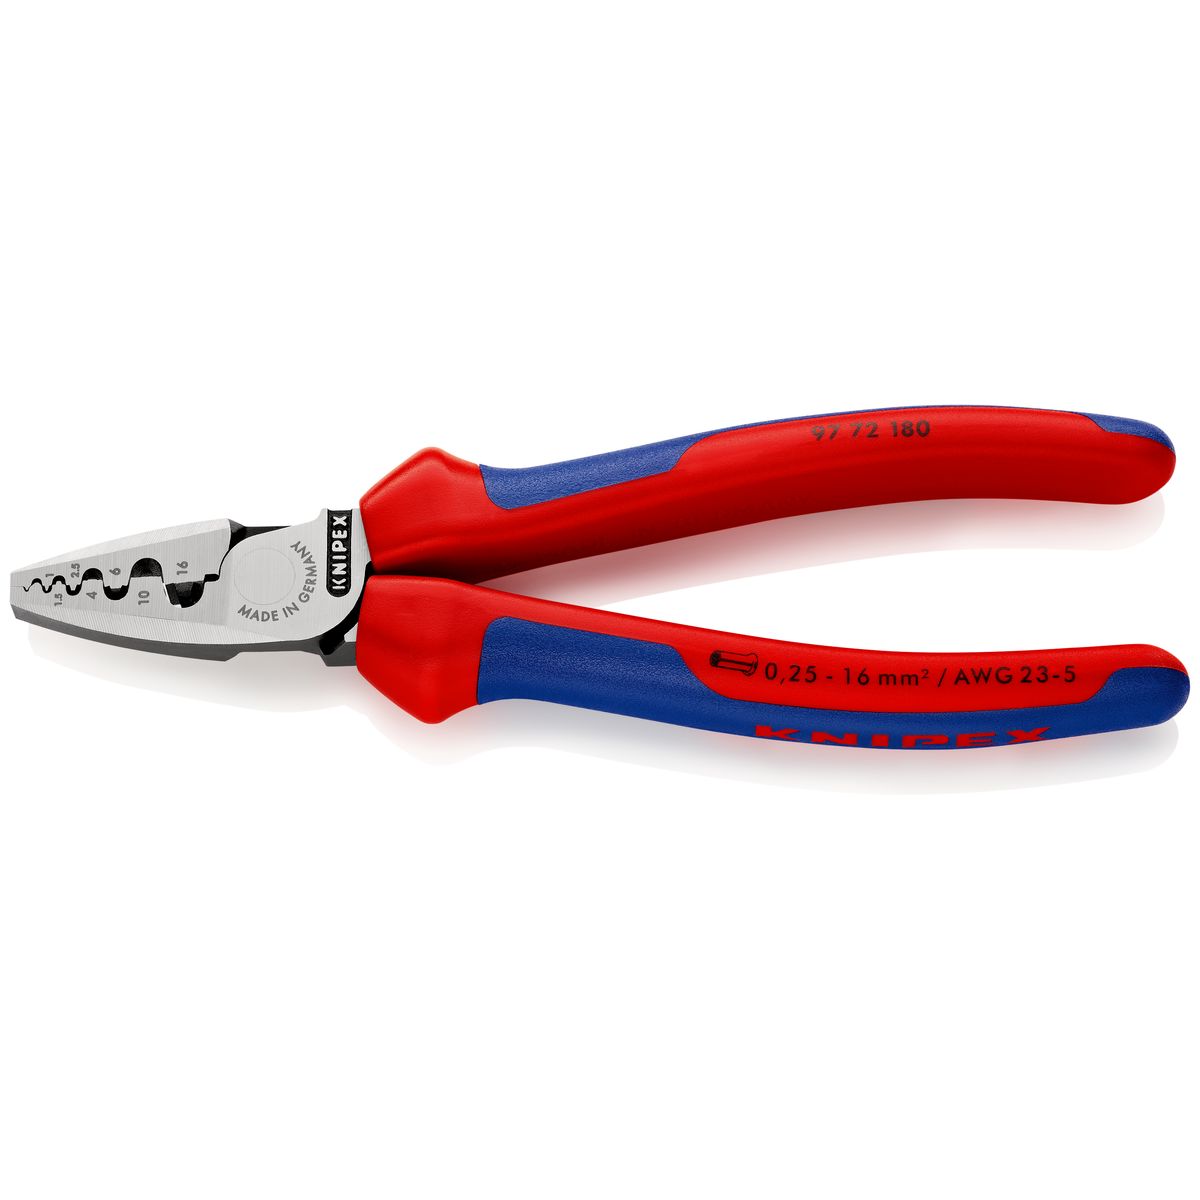 CRIMPING PLIERS F. CABLE LINKS 9772180 Knipex